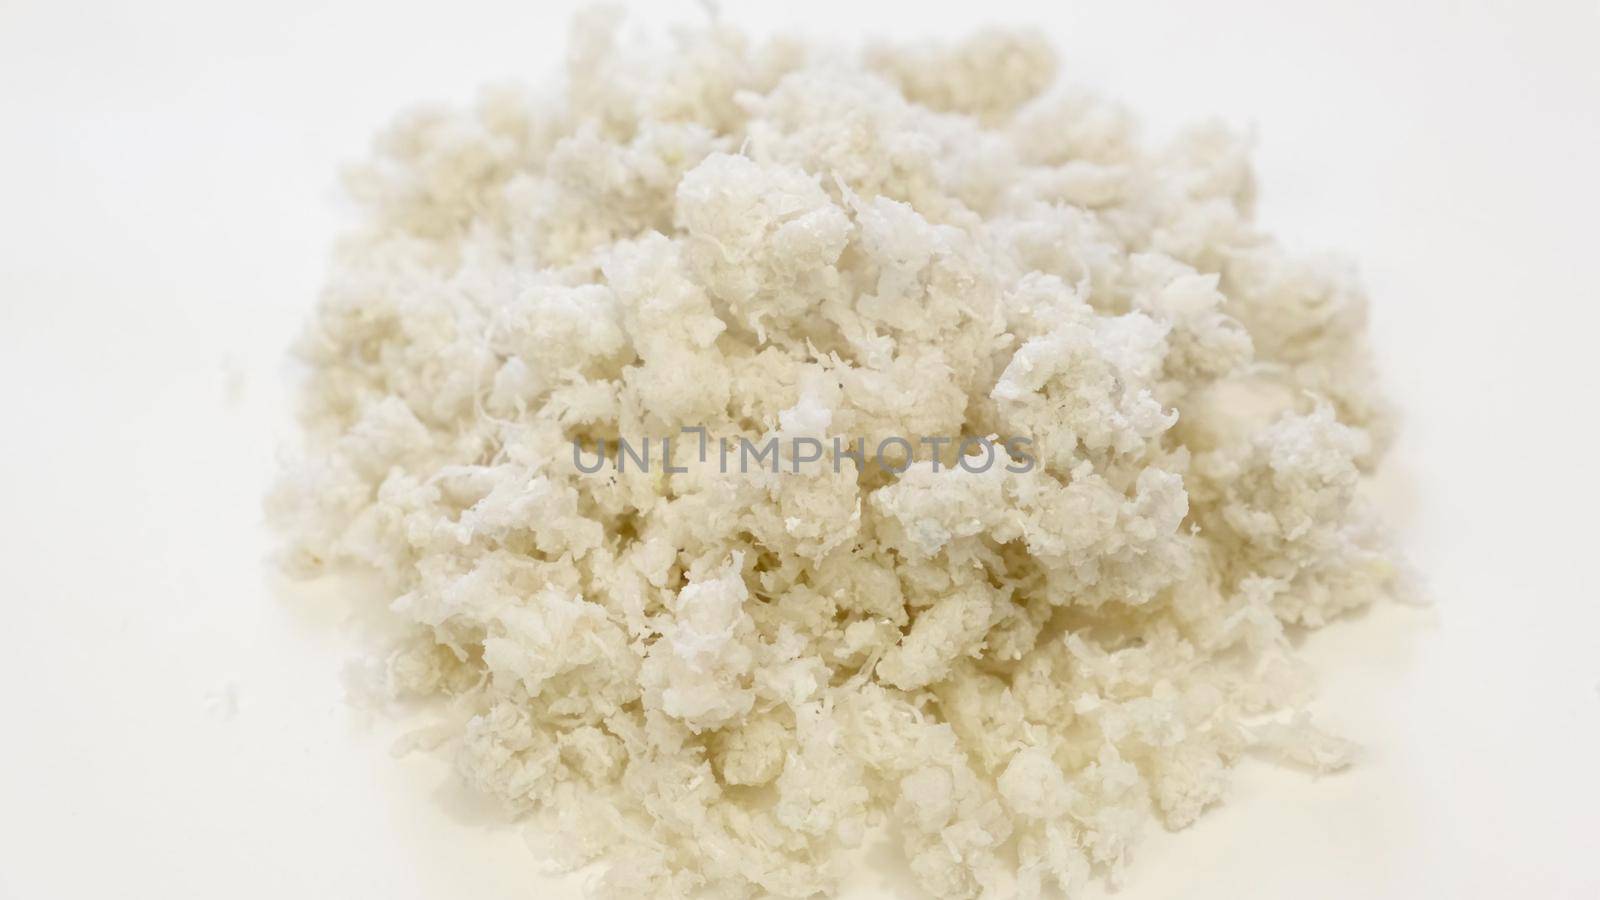 Agglomerate, processing of polypropylene film in the agglomerate. Semi-finished product for the production of granules and raw materials. Plastic recycling concept. PET, HDPE, PVC, LDPE, PP, PS